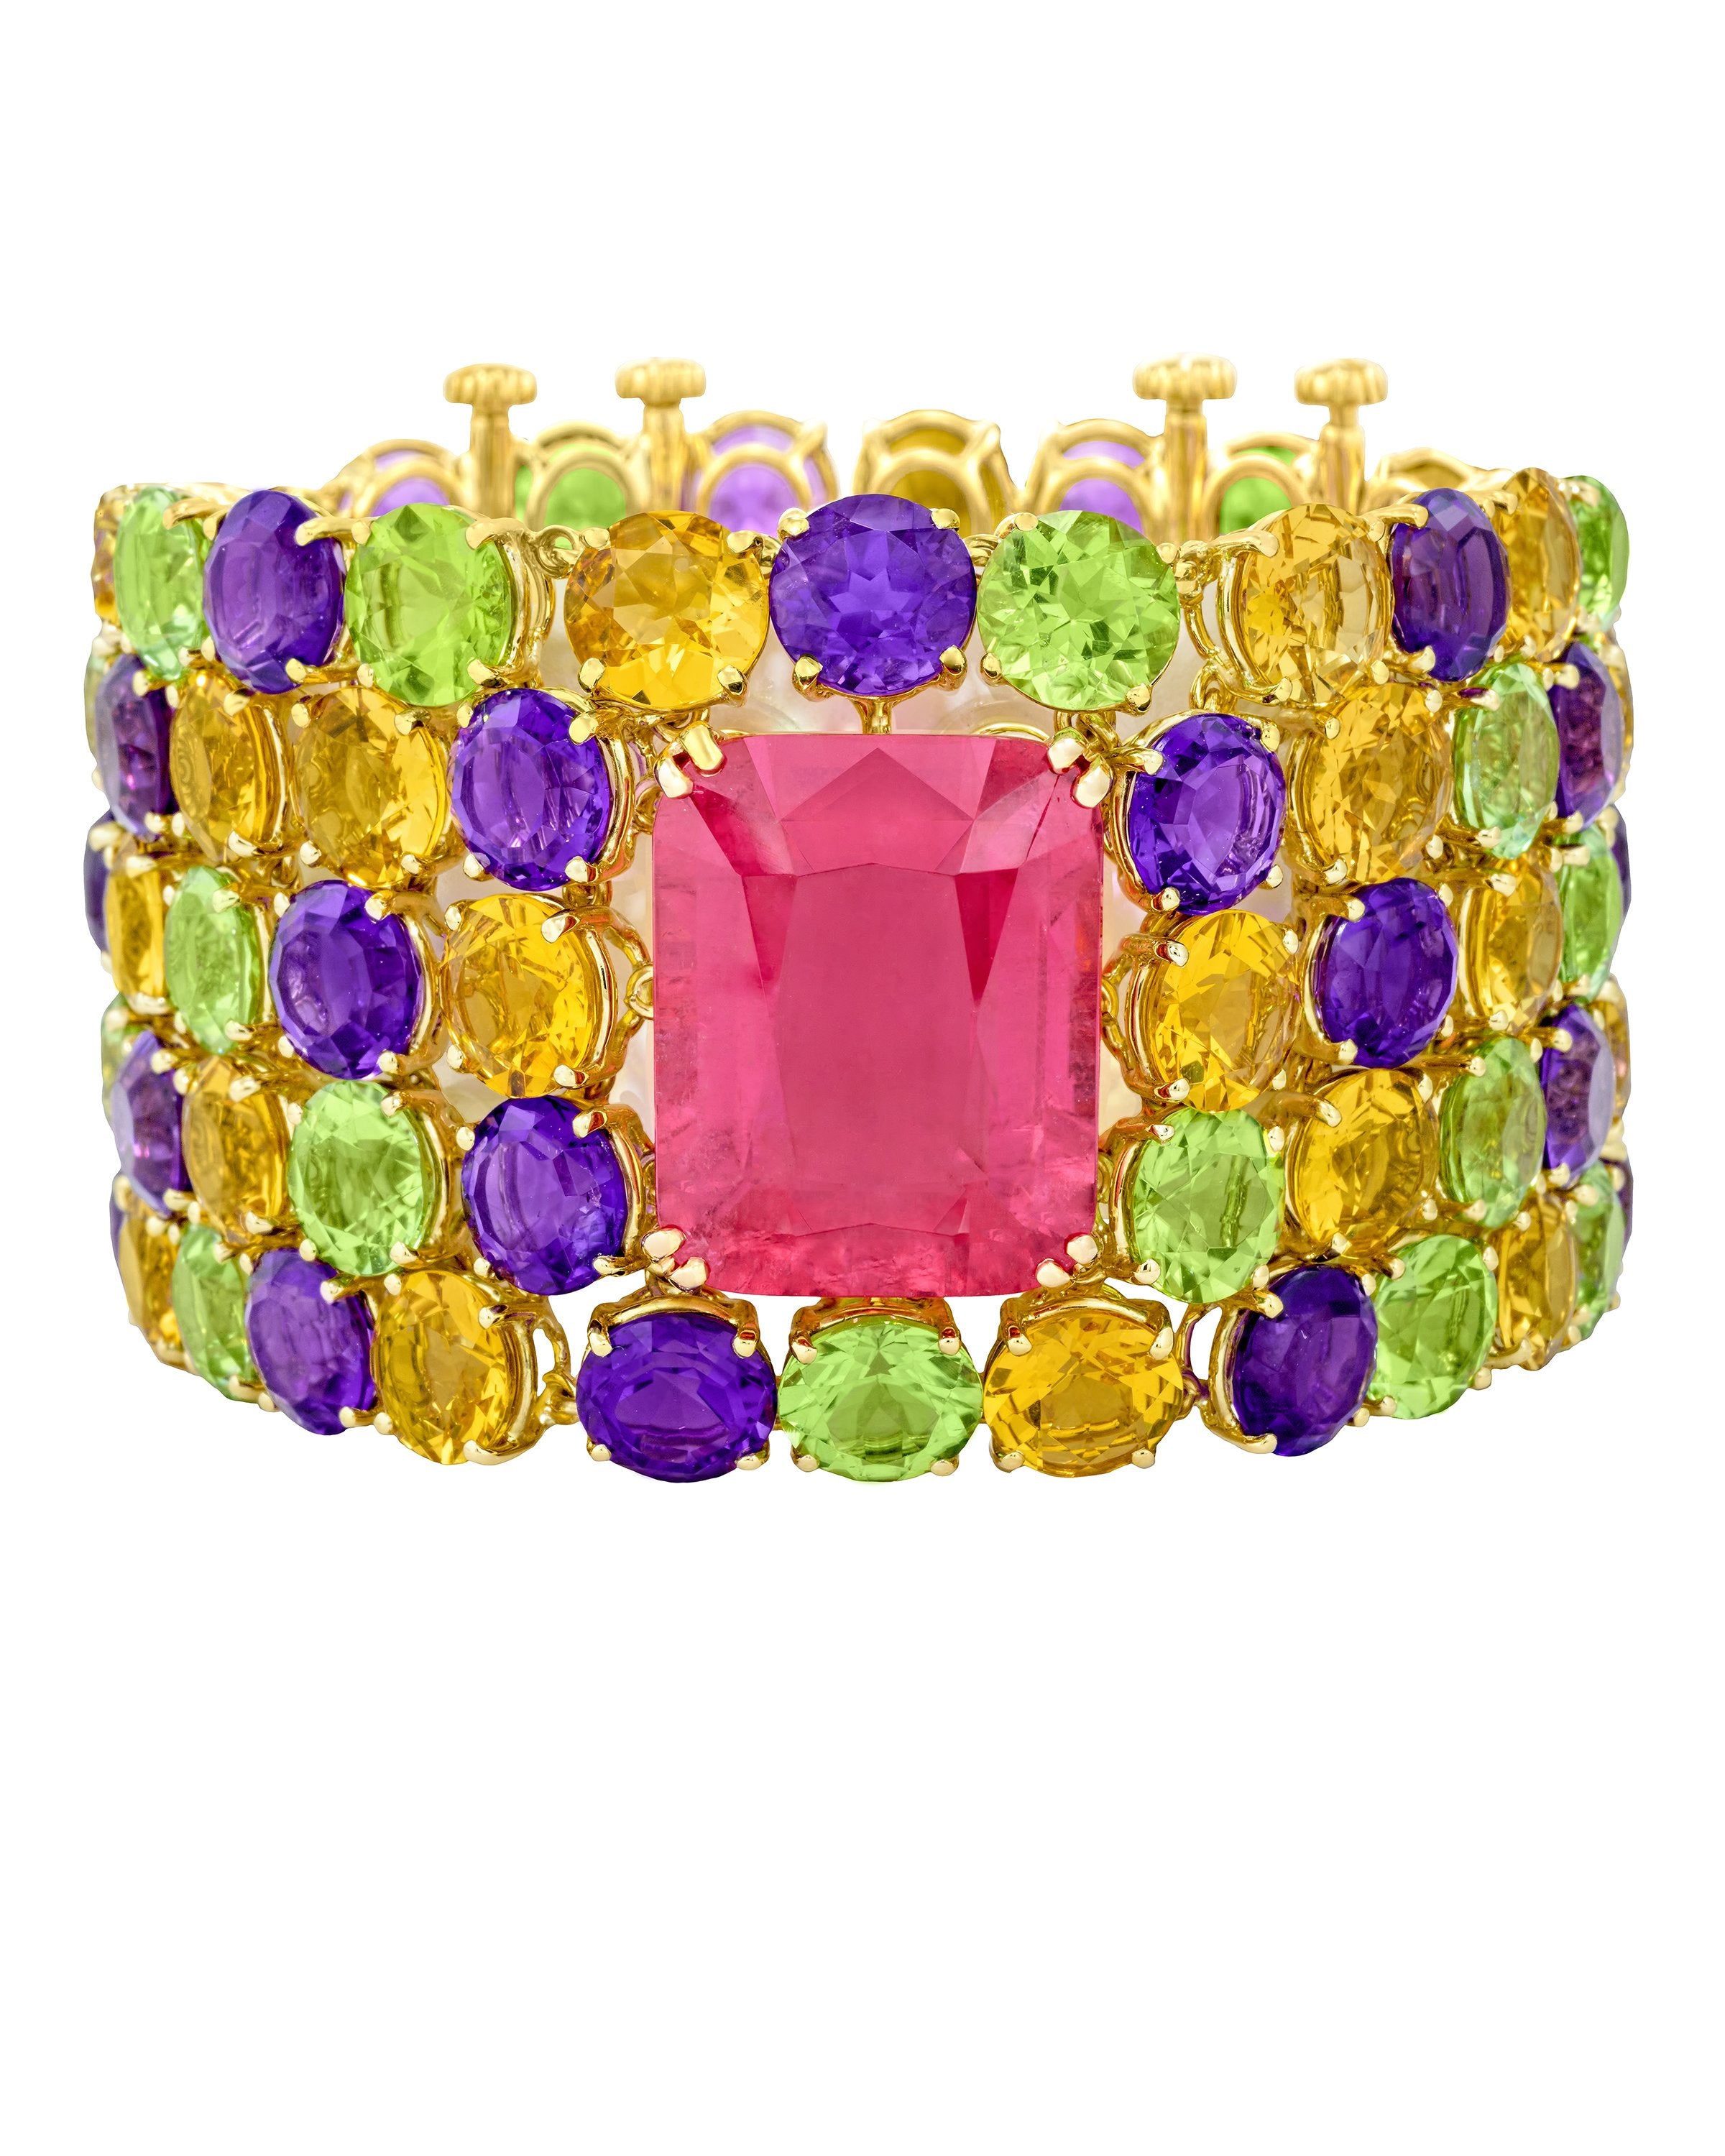 "Tutti Frutti" cuff featuring a center NYC rubellite, with yellow beryl, amethyst and peridot, crafted in 18 karat yellow gold.